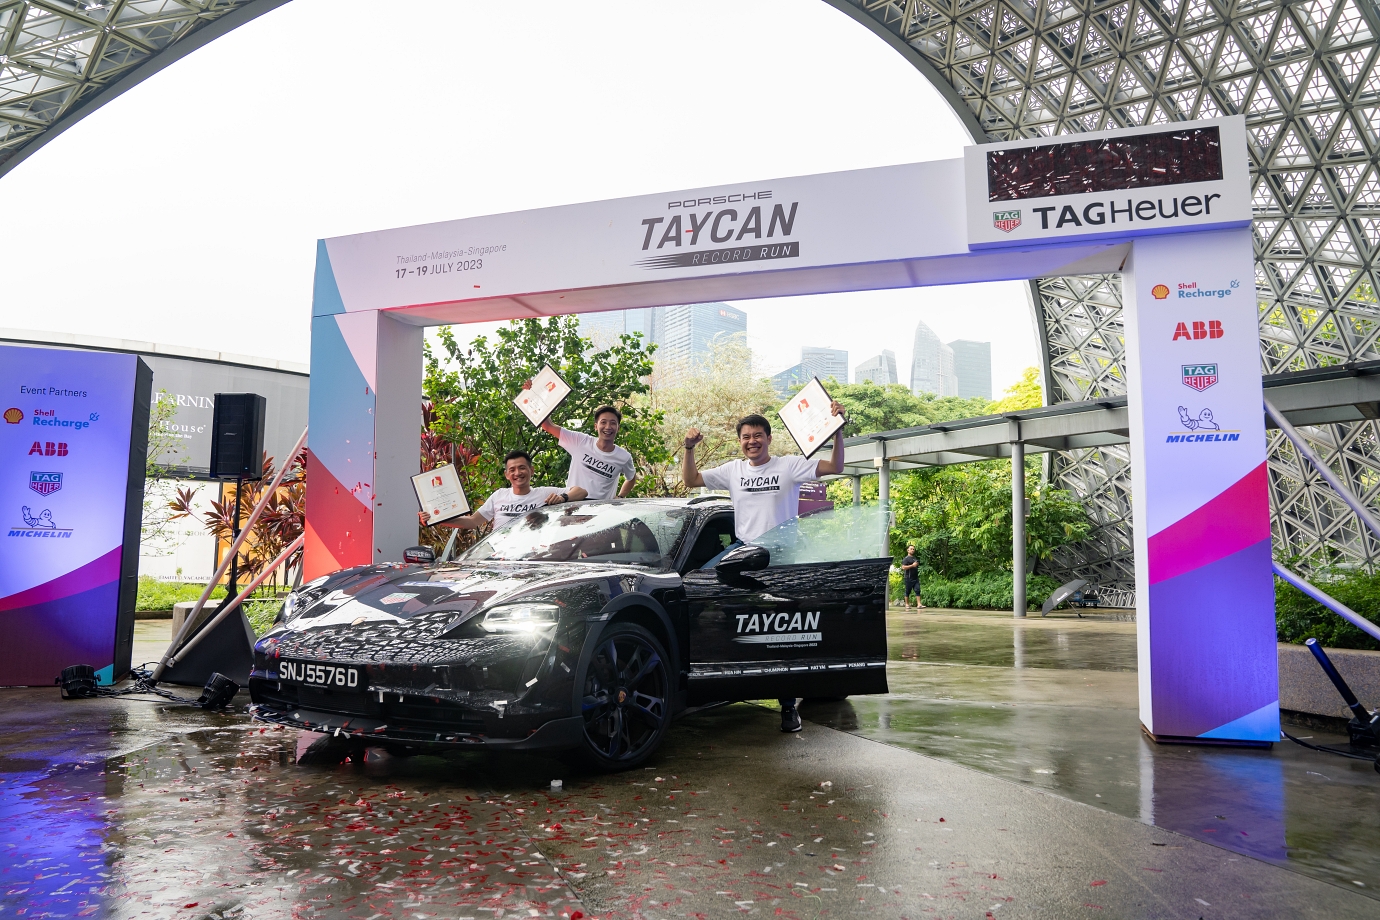 porsche taycan, taycan 4s, porsche singapore, tag heuer, andre brand, shell recharge, porsche moments, sportscar together, porsche taycan, taycan, ev, electric vehicles, porsche taycan 4s, porsche taycan 4s cross turismo makes ev record run from thailand to singapore in 29 hours 15 minutes